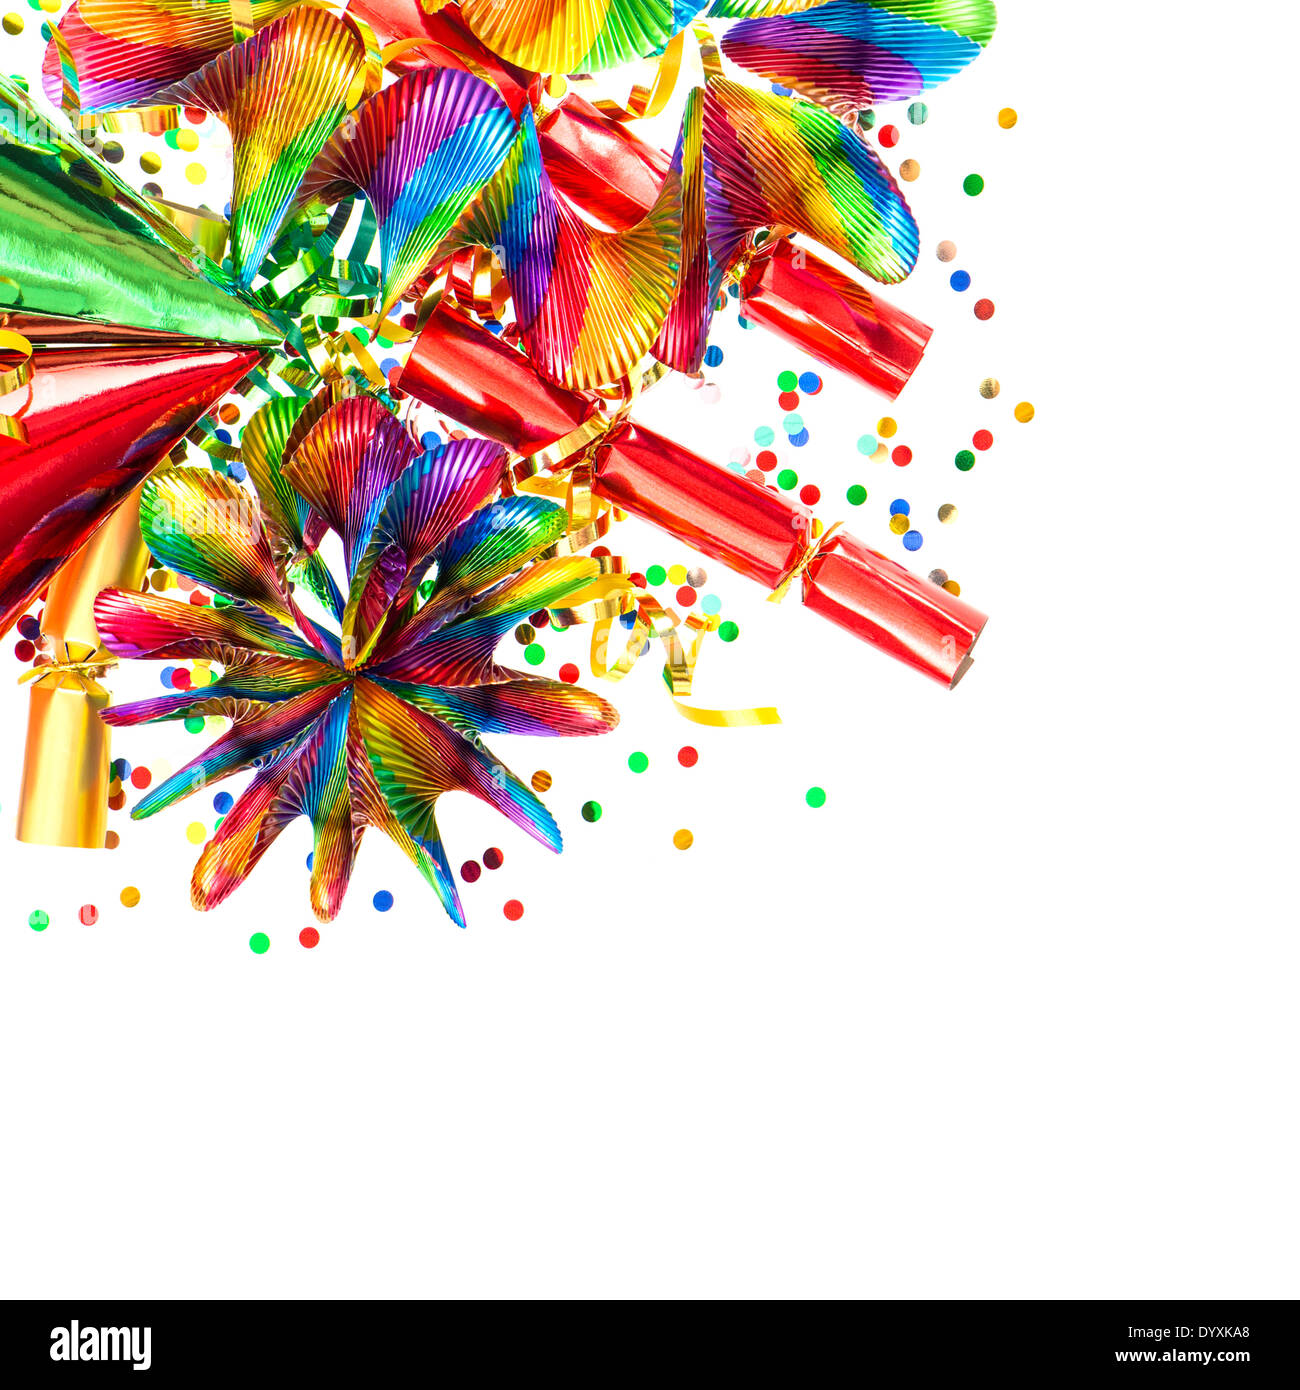 colorful garlands, streamer, party hats and confetti. festive decorations background. carnival items Stock Photo